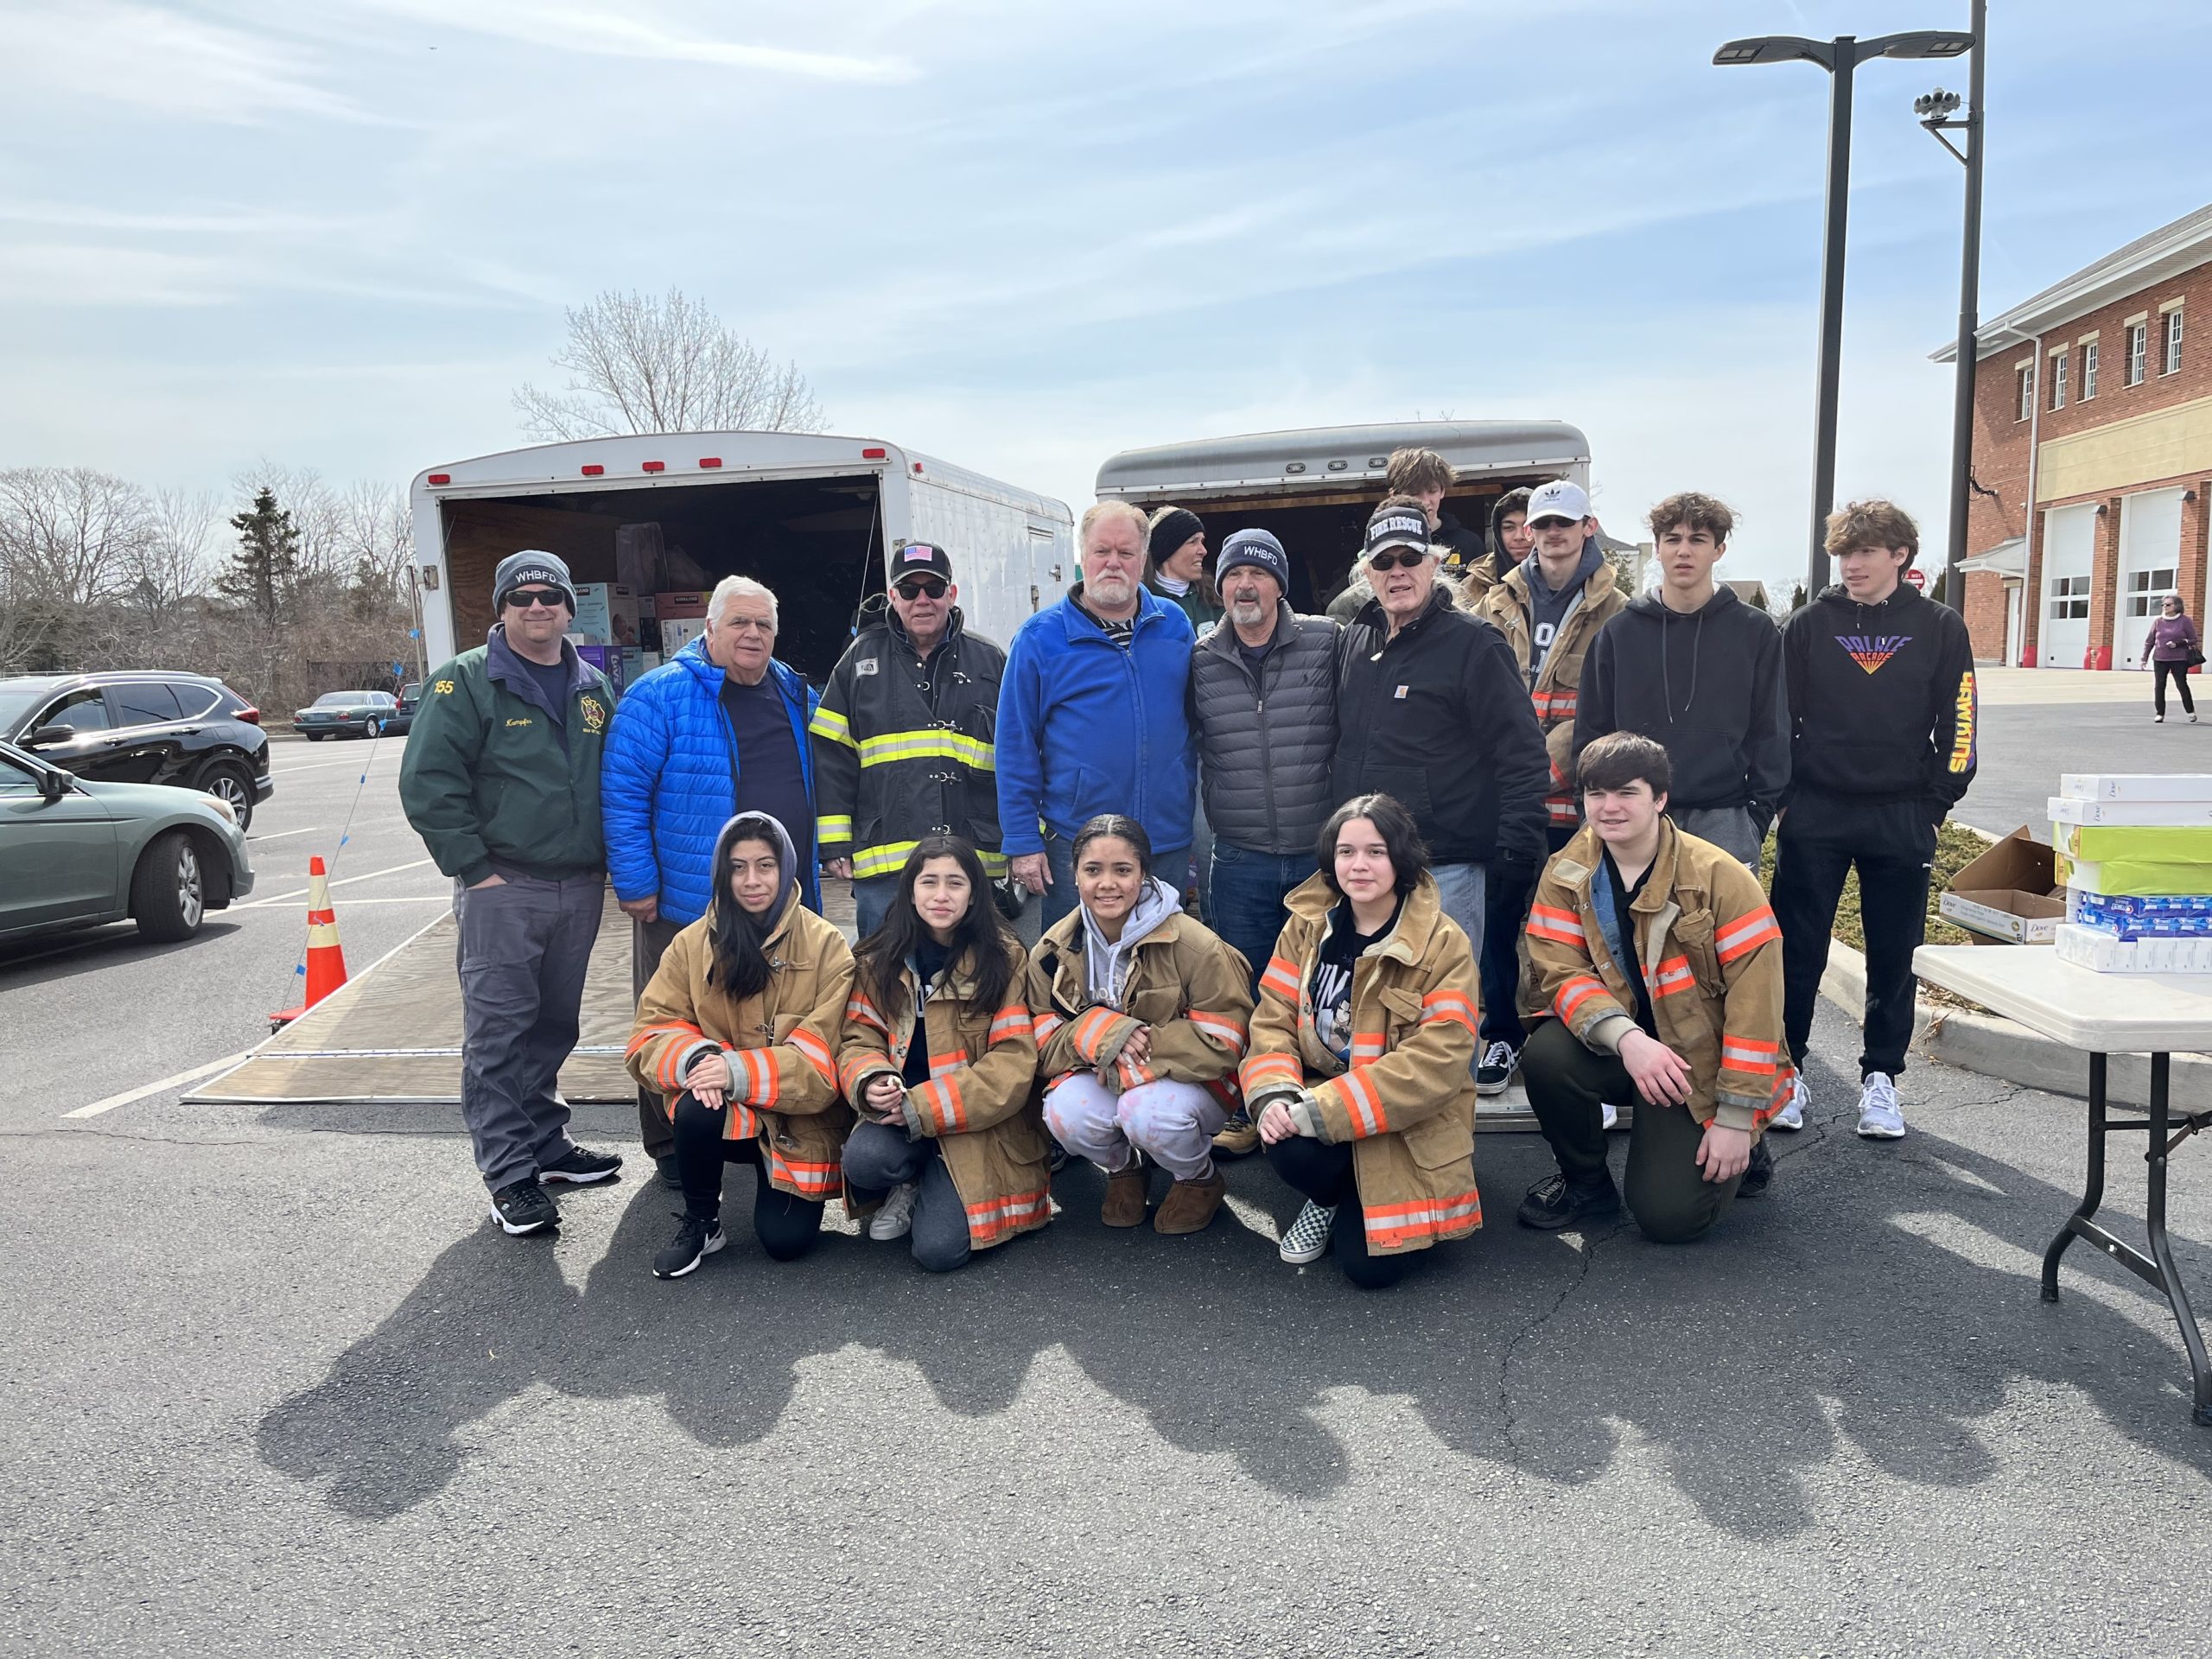 Members of the Father Slomski Council of the Knights of Columbus with members of the Westhampton Beach Fire Department after the Knights dropped off donations for Ukrainian relief to a drive being organized by the fire department.